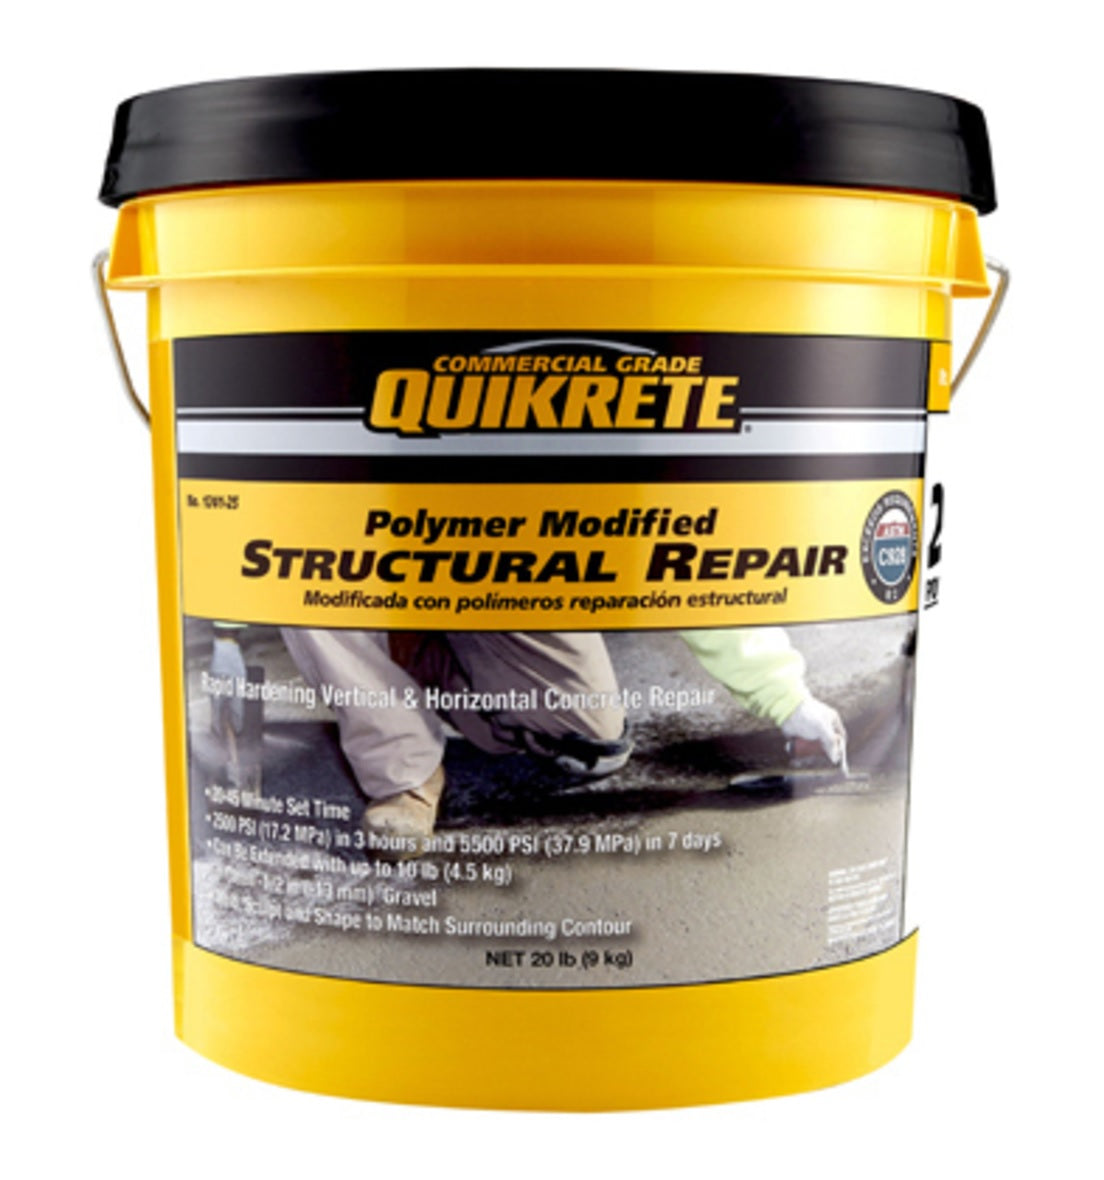 Quikrete 1241-25 Polymer Modified Structural Repair, 20 LB